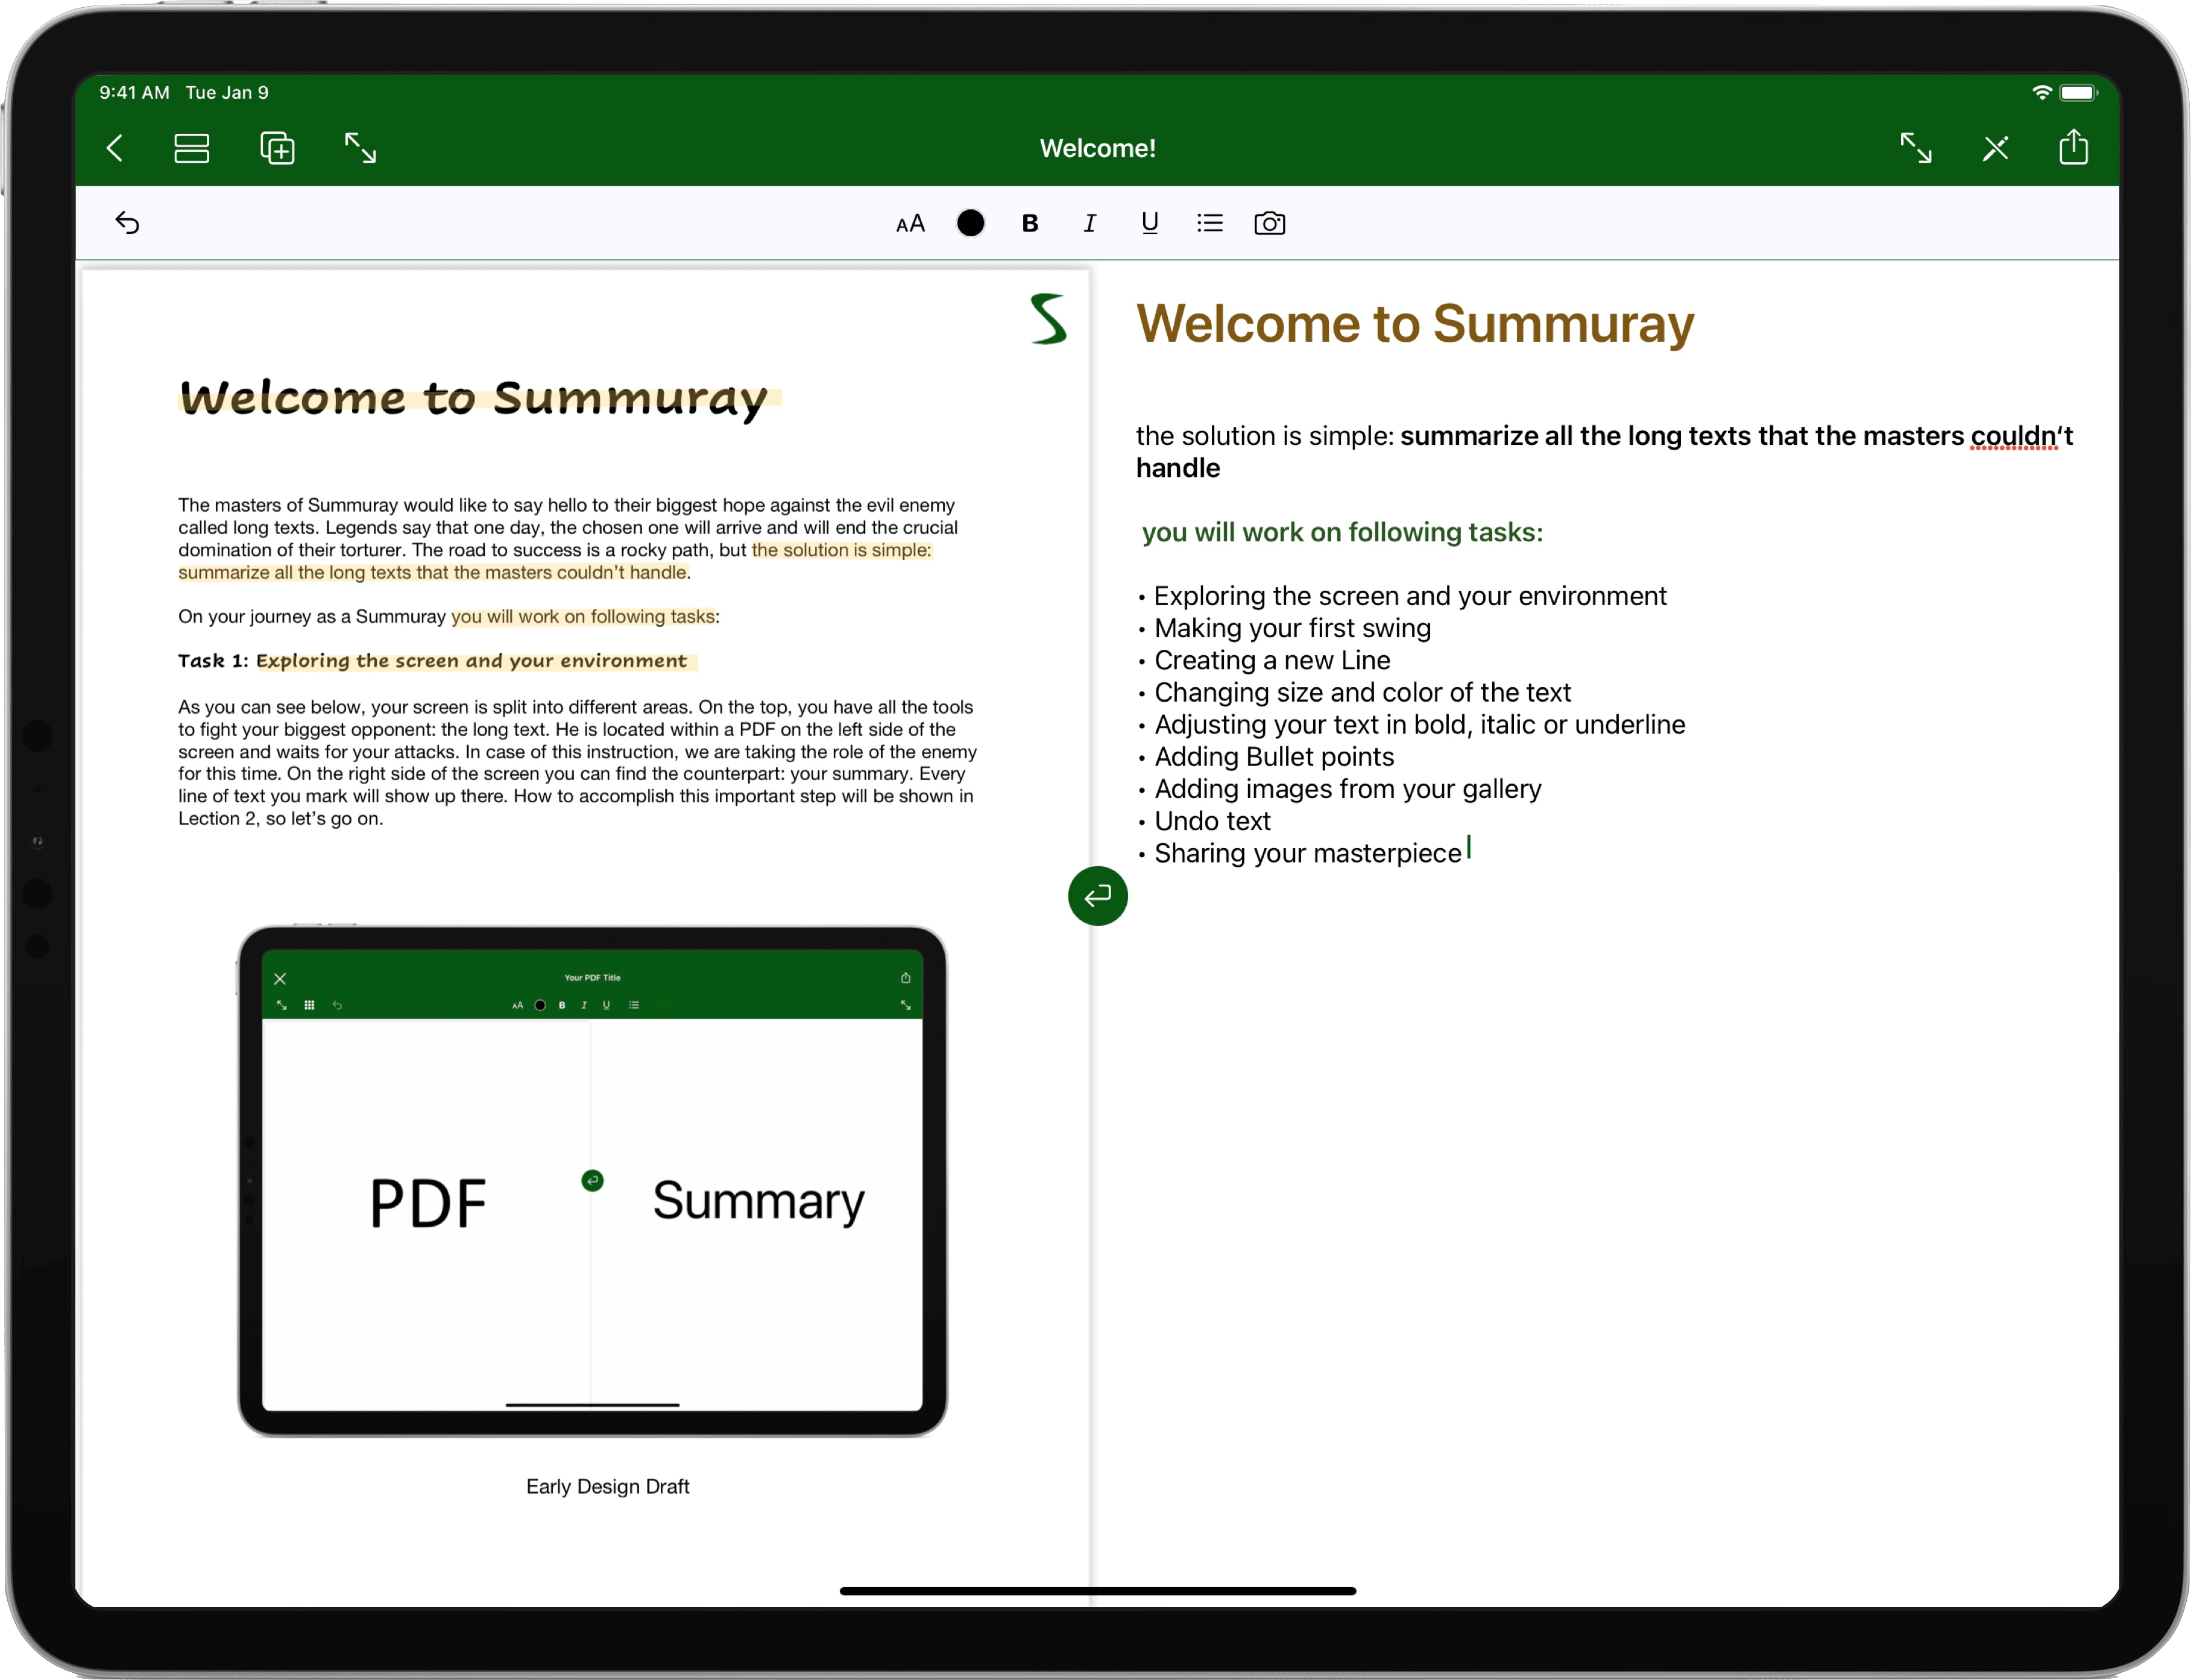 The Summuray App interface for text selection on an iPad